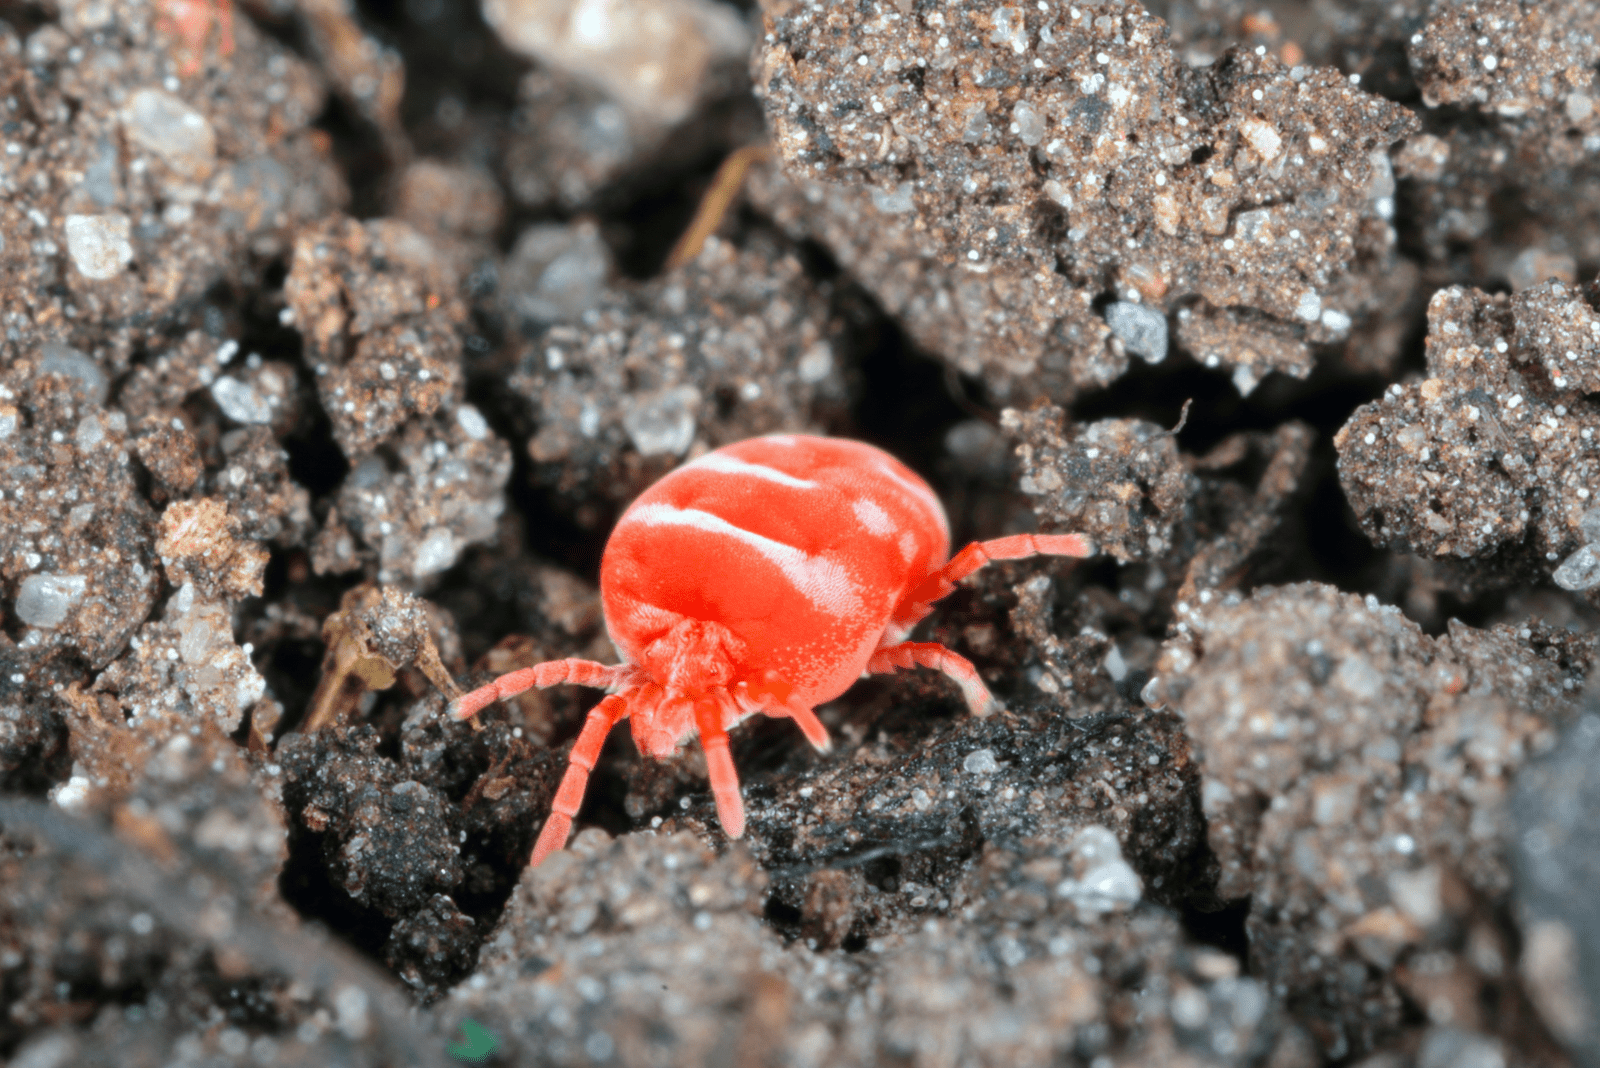 Soil Mites in the ground